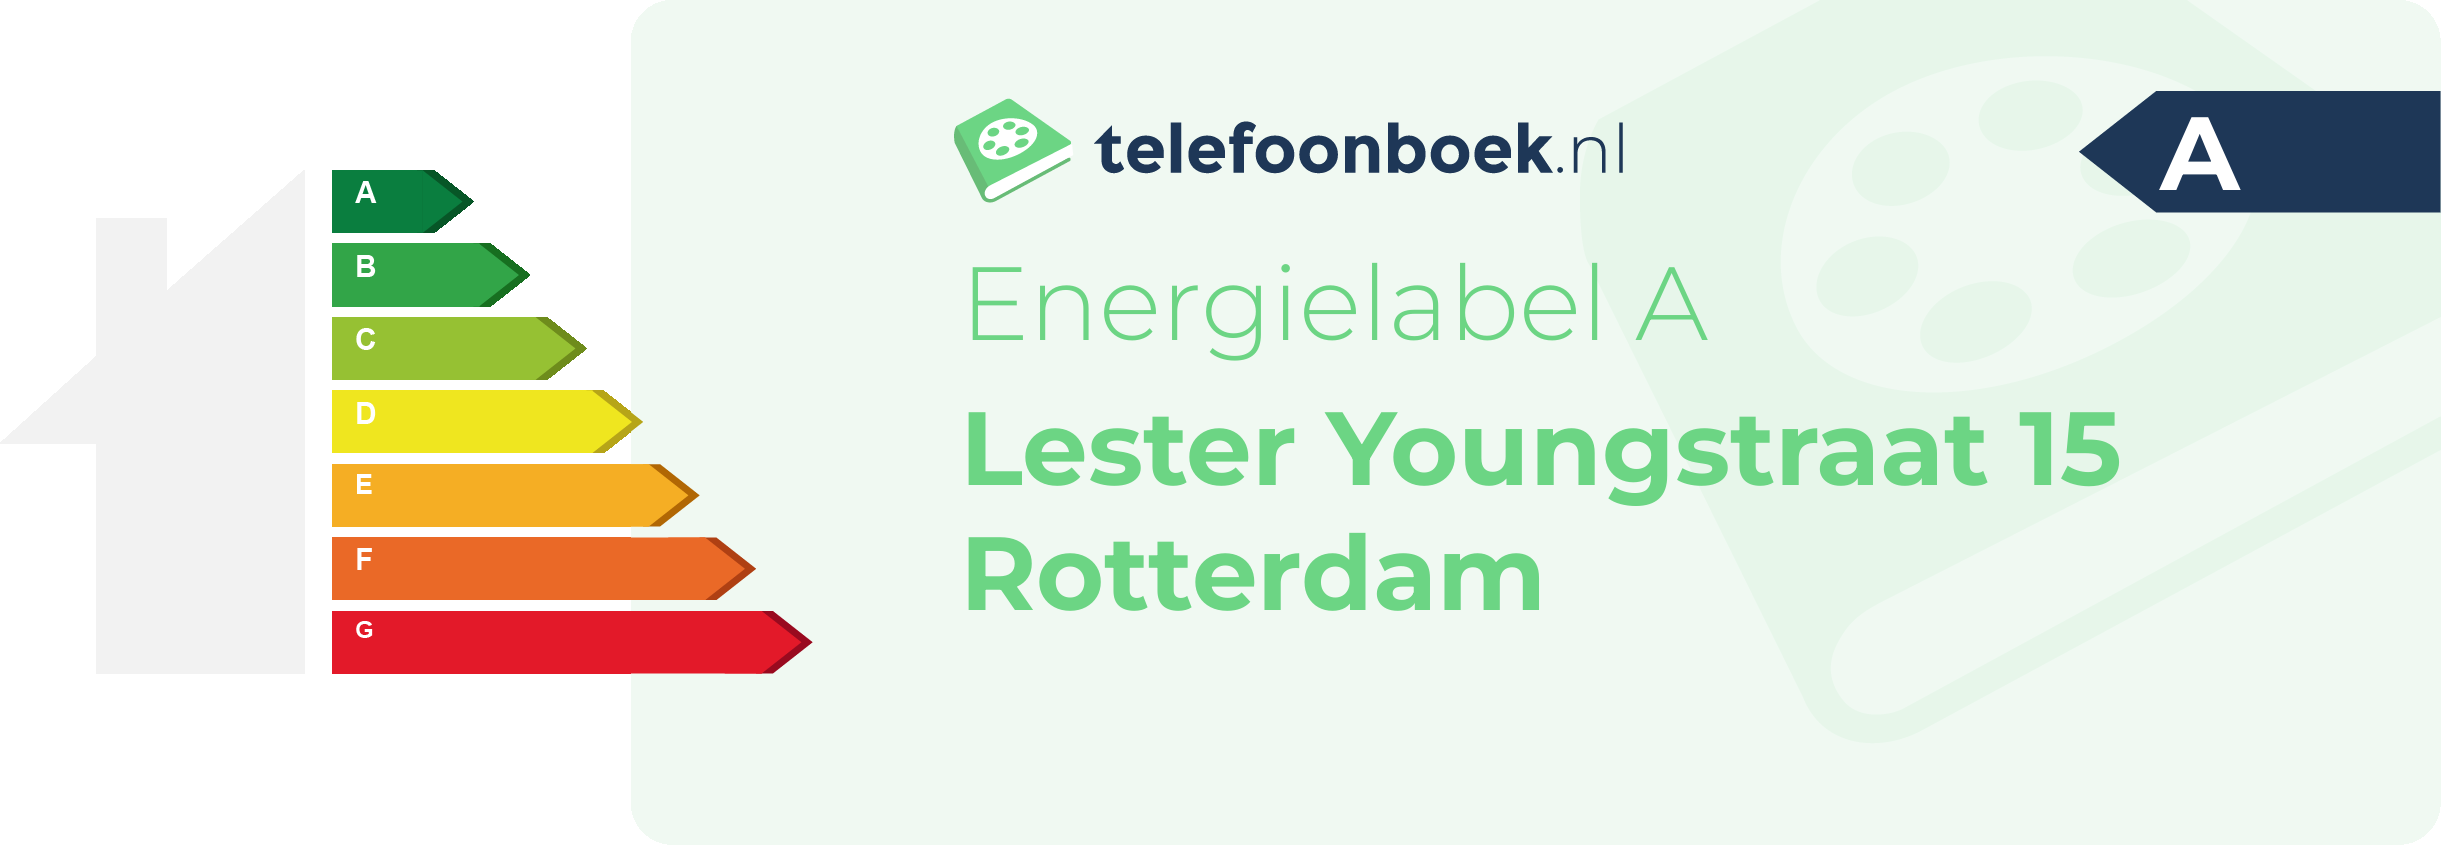 Energielabel Lester Youngstraat 15 Rotterdam